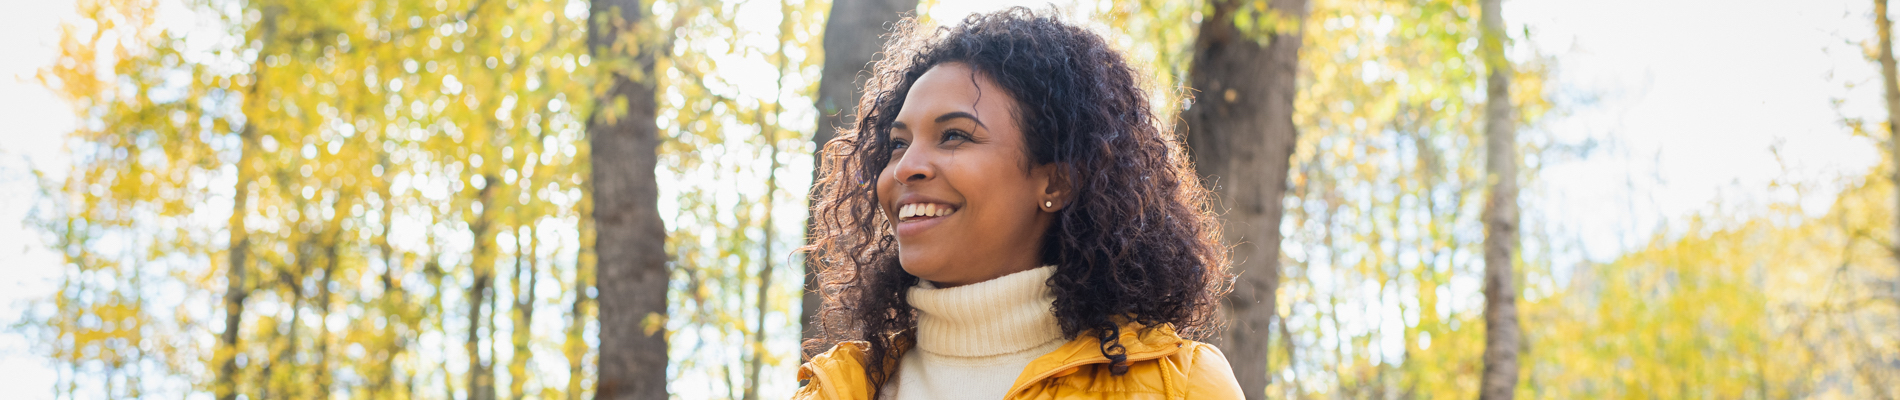 Woman with a white turtle neck and yellow coat smiling in the woods